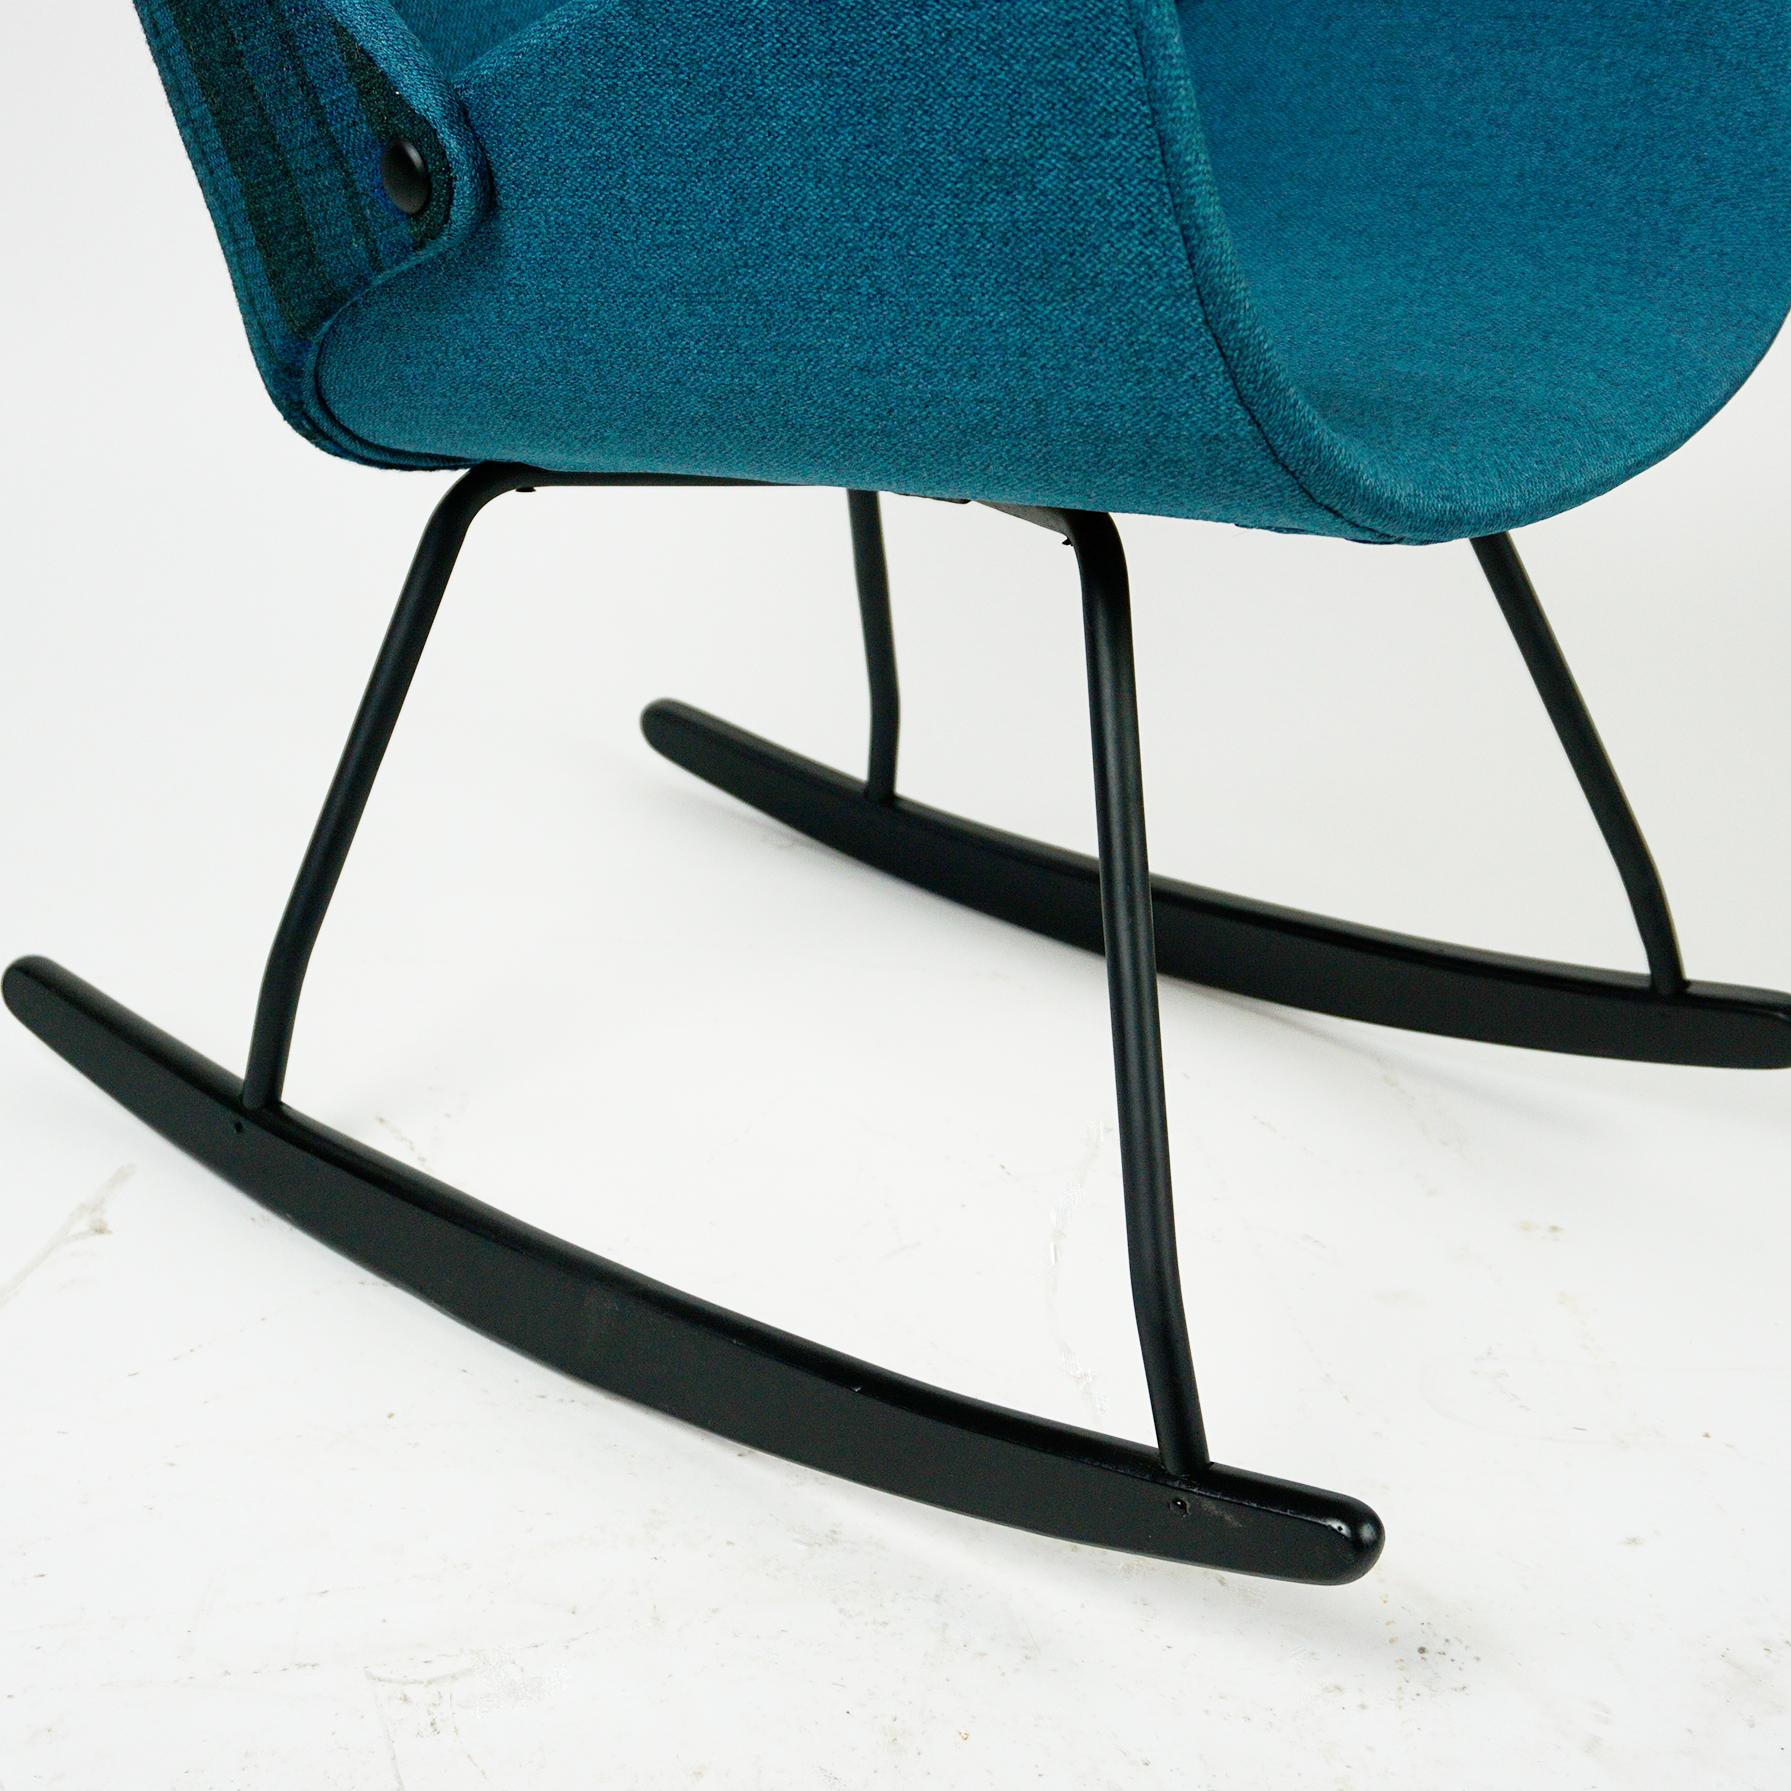 Black Lacquered Scandinavian Shell Seat Rocking Chair with Blue Fabric 1